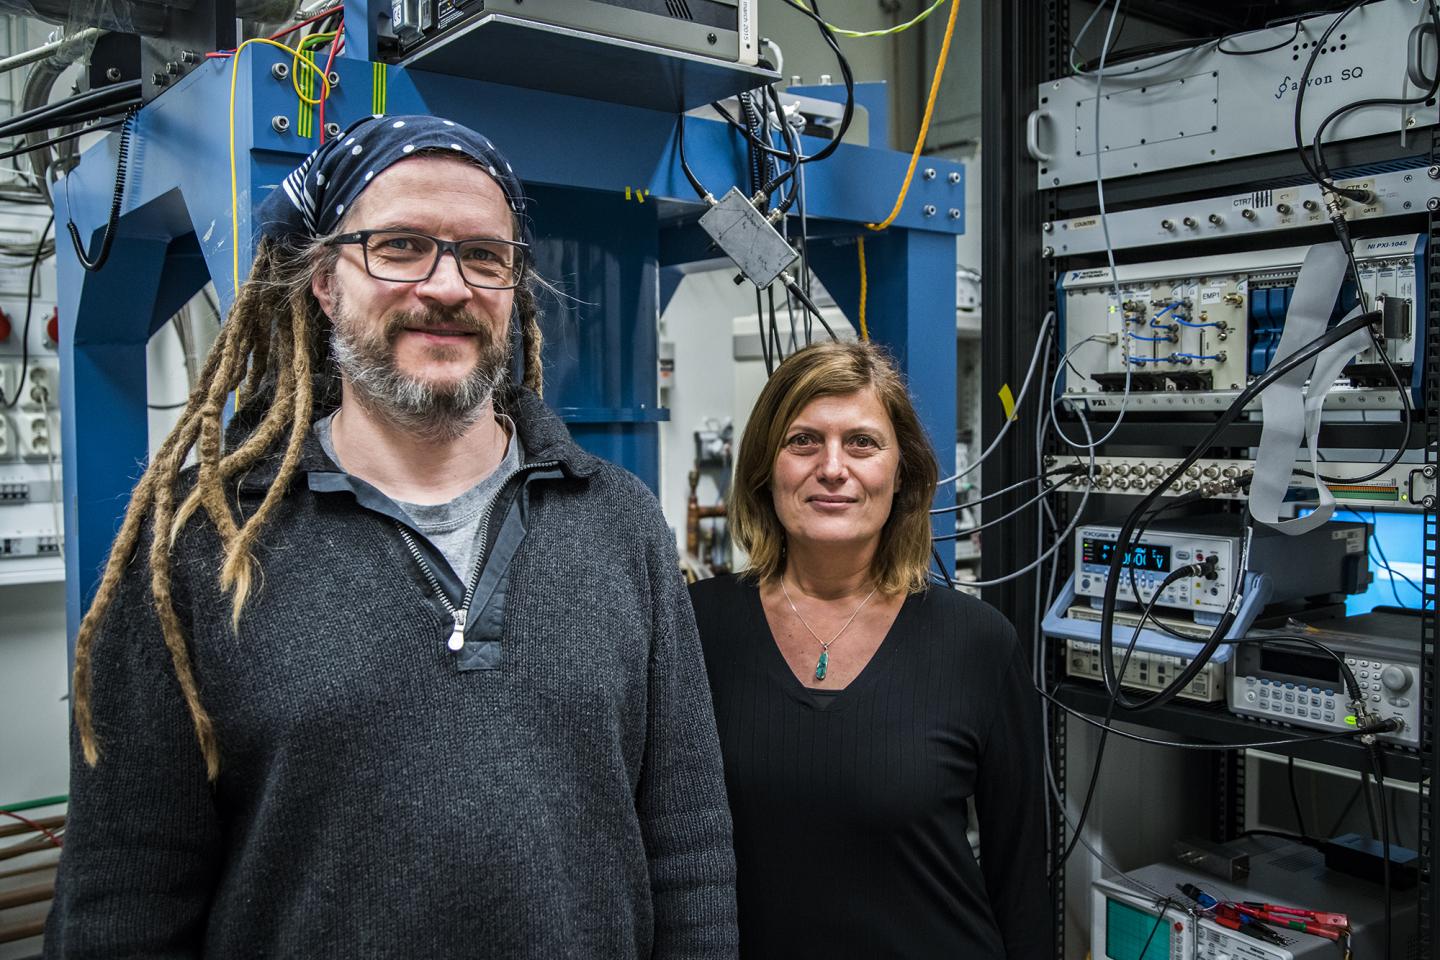 After an intensive period of analyses the research team led by Professor Floriana Lombardi, Chalmers University of Technology, was able to establish that they had probably succeeded in creating a topological superconductor. (Source: Johan Bodell/Chalmers University of Technology)